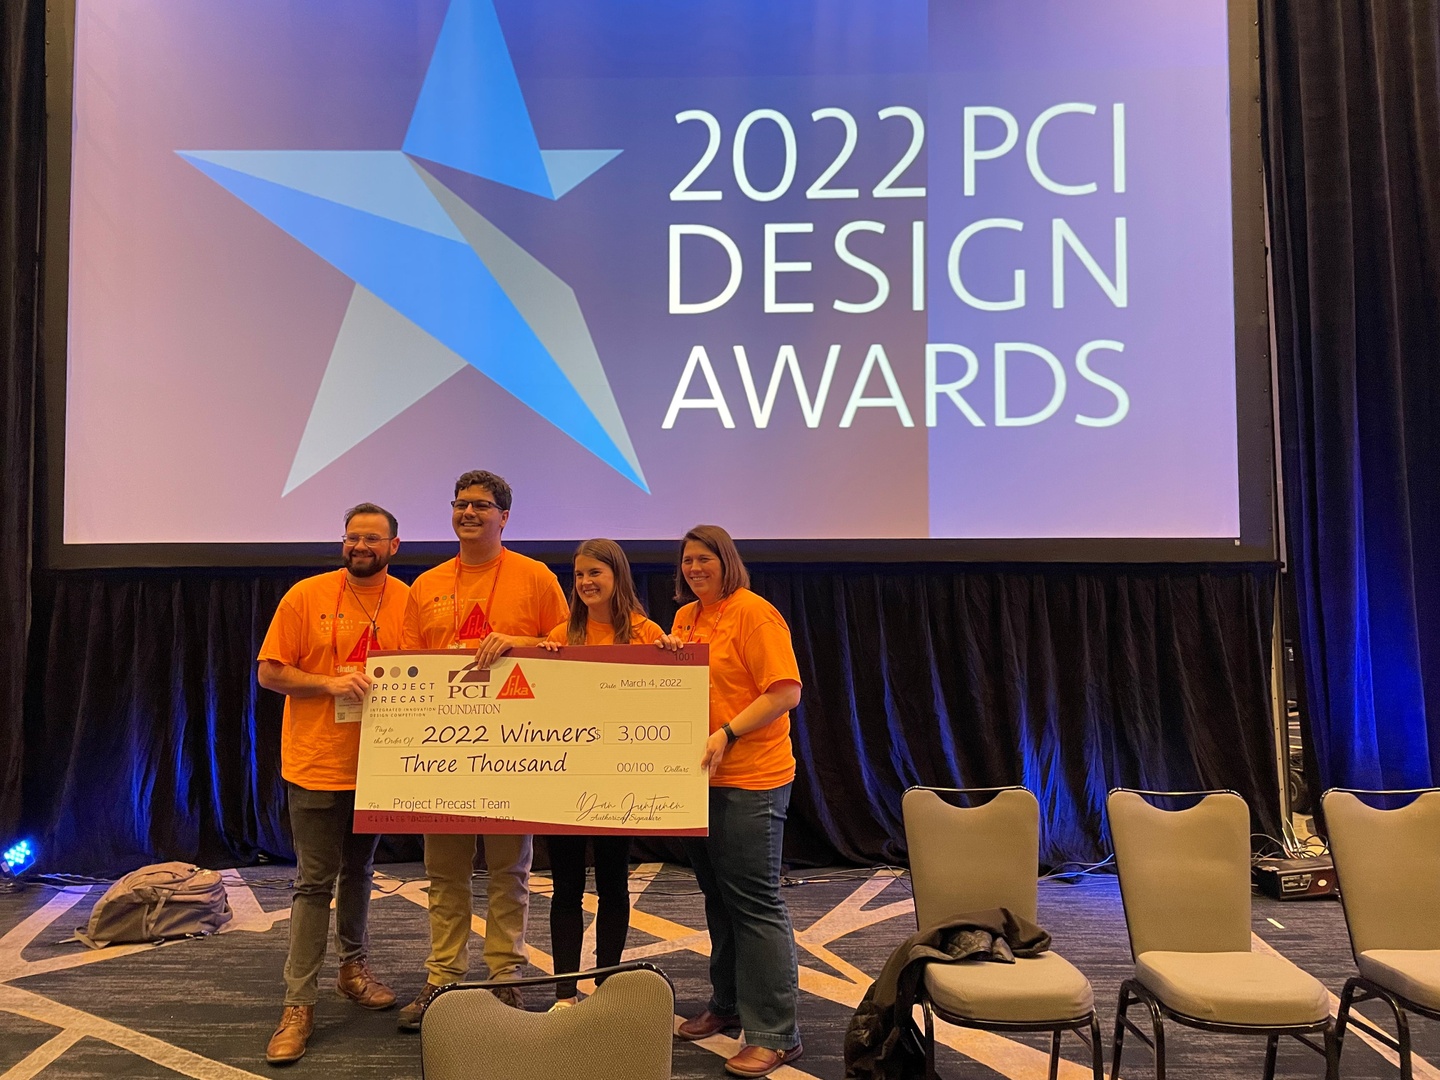 Photo of four team members in orange shirts holding an oversized check, in front of a digital screen for 2022 PCI Design Awards